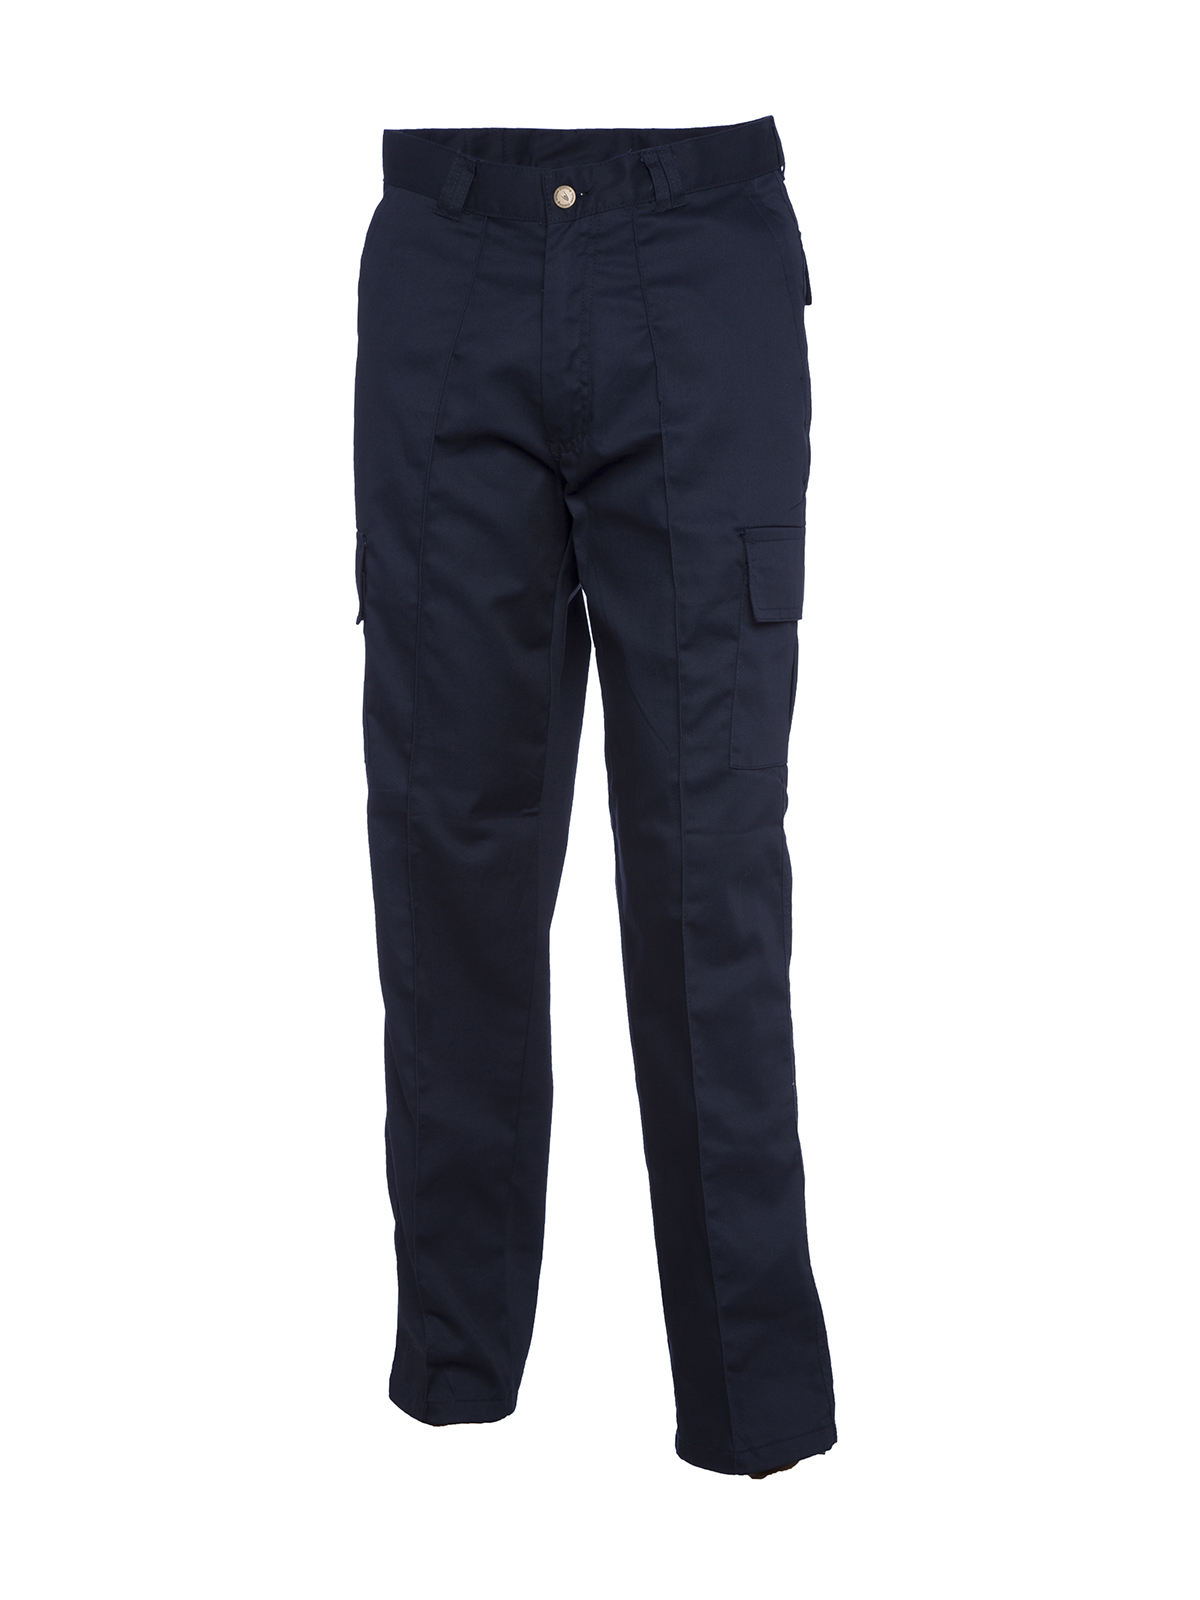 Cargo Trousers, Navy Blue - 32S